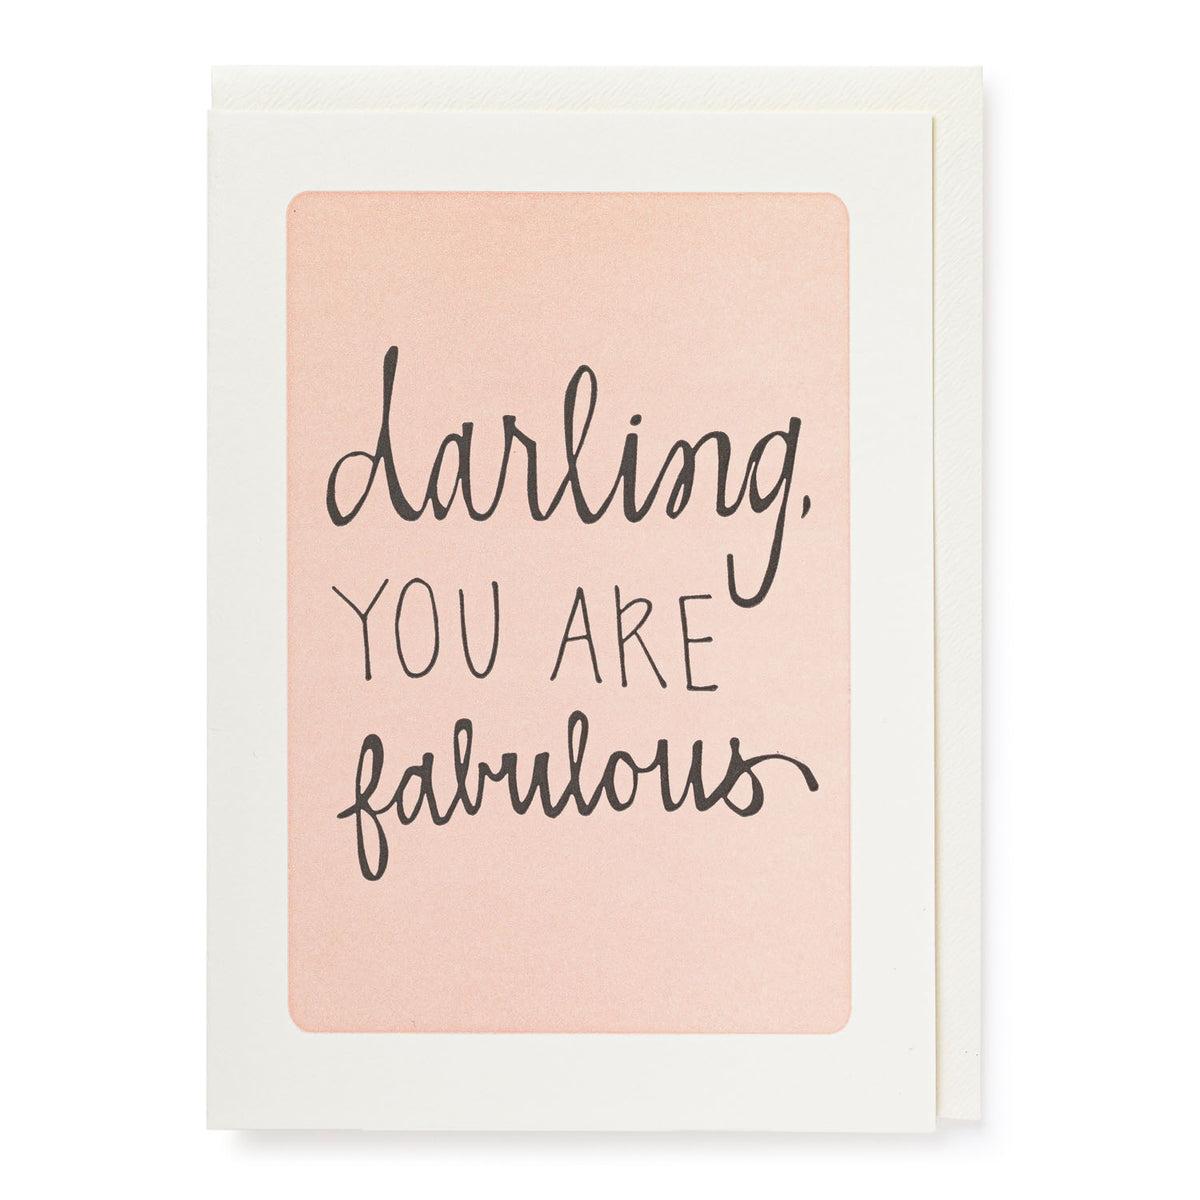 You Are Fabulous - letterpress printed greeting card